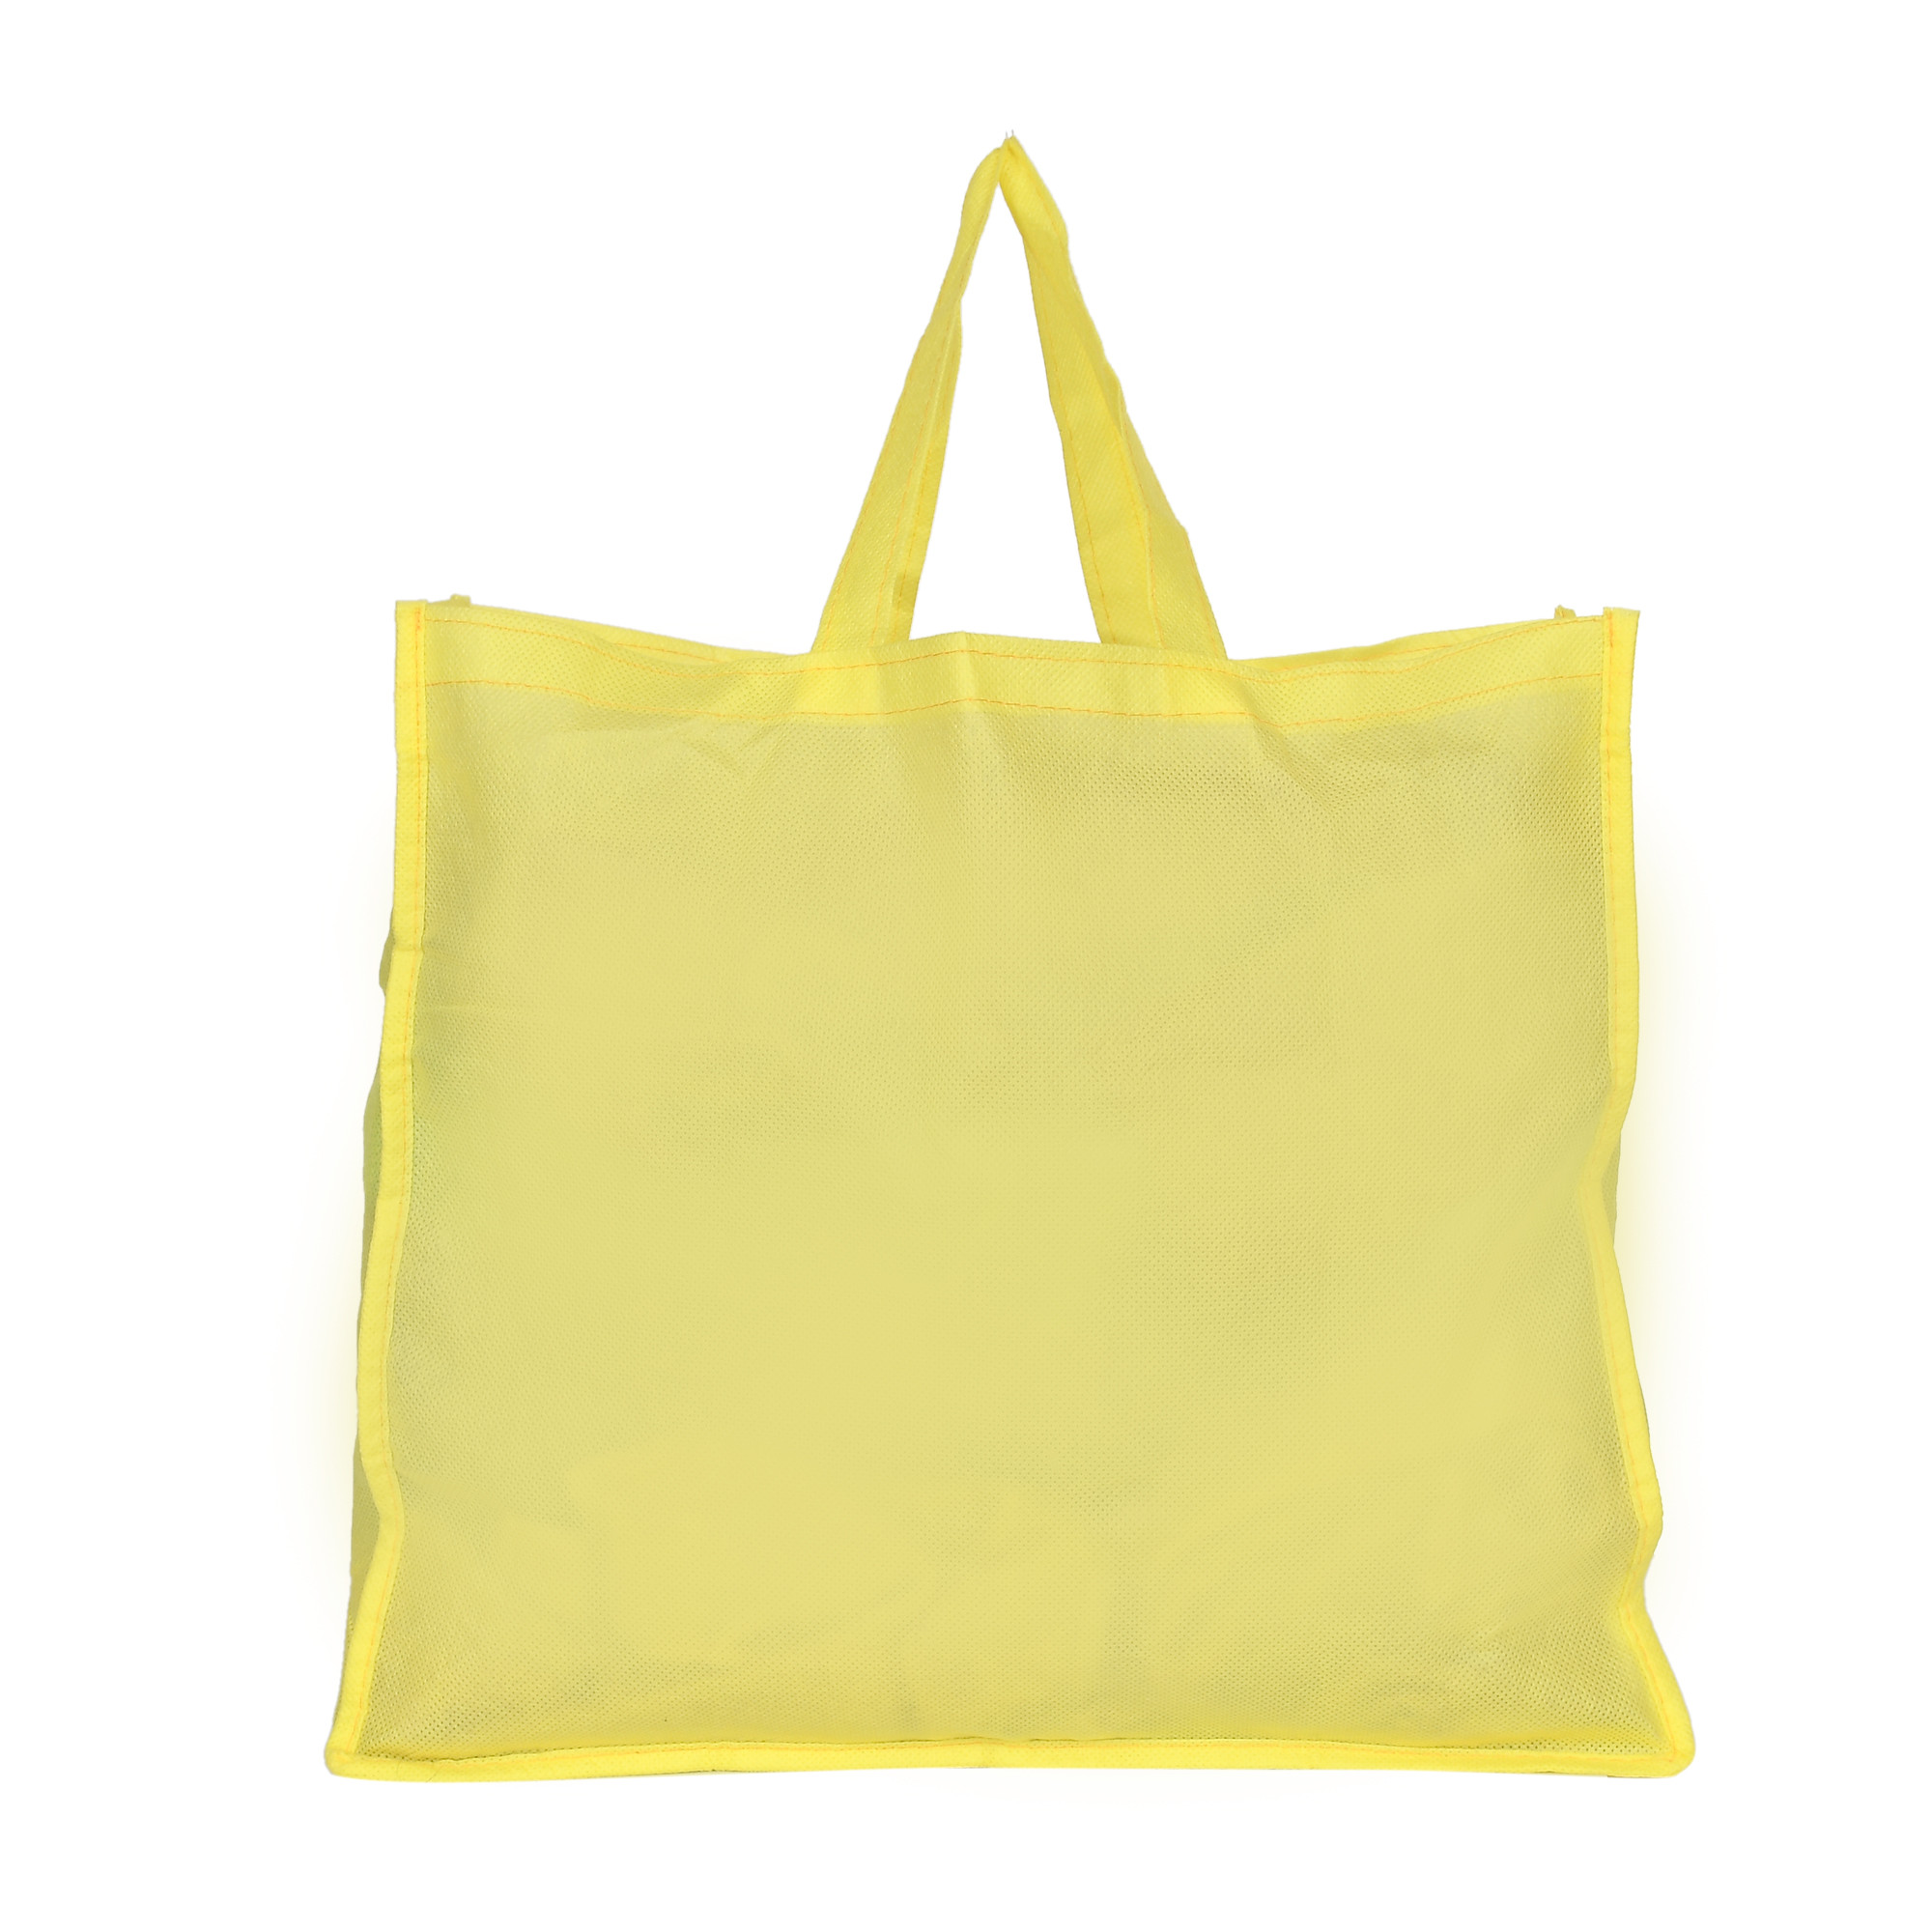 Kuber Industries Shopping Grocery Bags Foldable, Washable Grocery Tote Bag with One Small Pocket, Eco-Friendly Purse Bag Fits in Pocket Waterproof & Lightweight (Yellow)